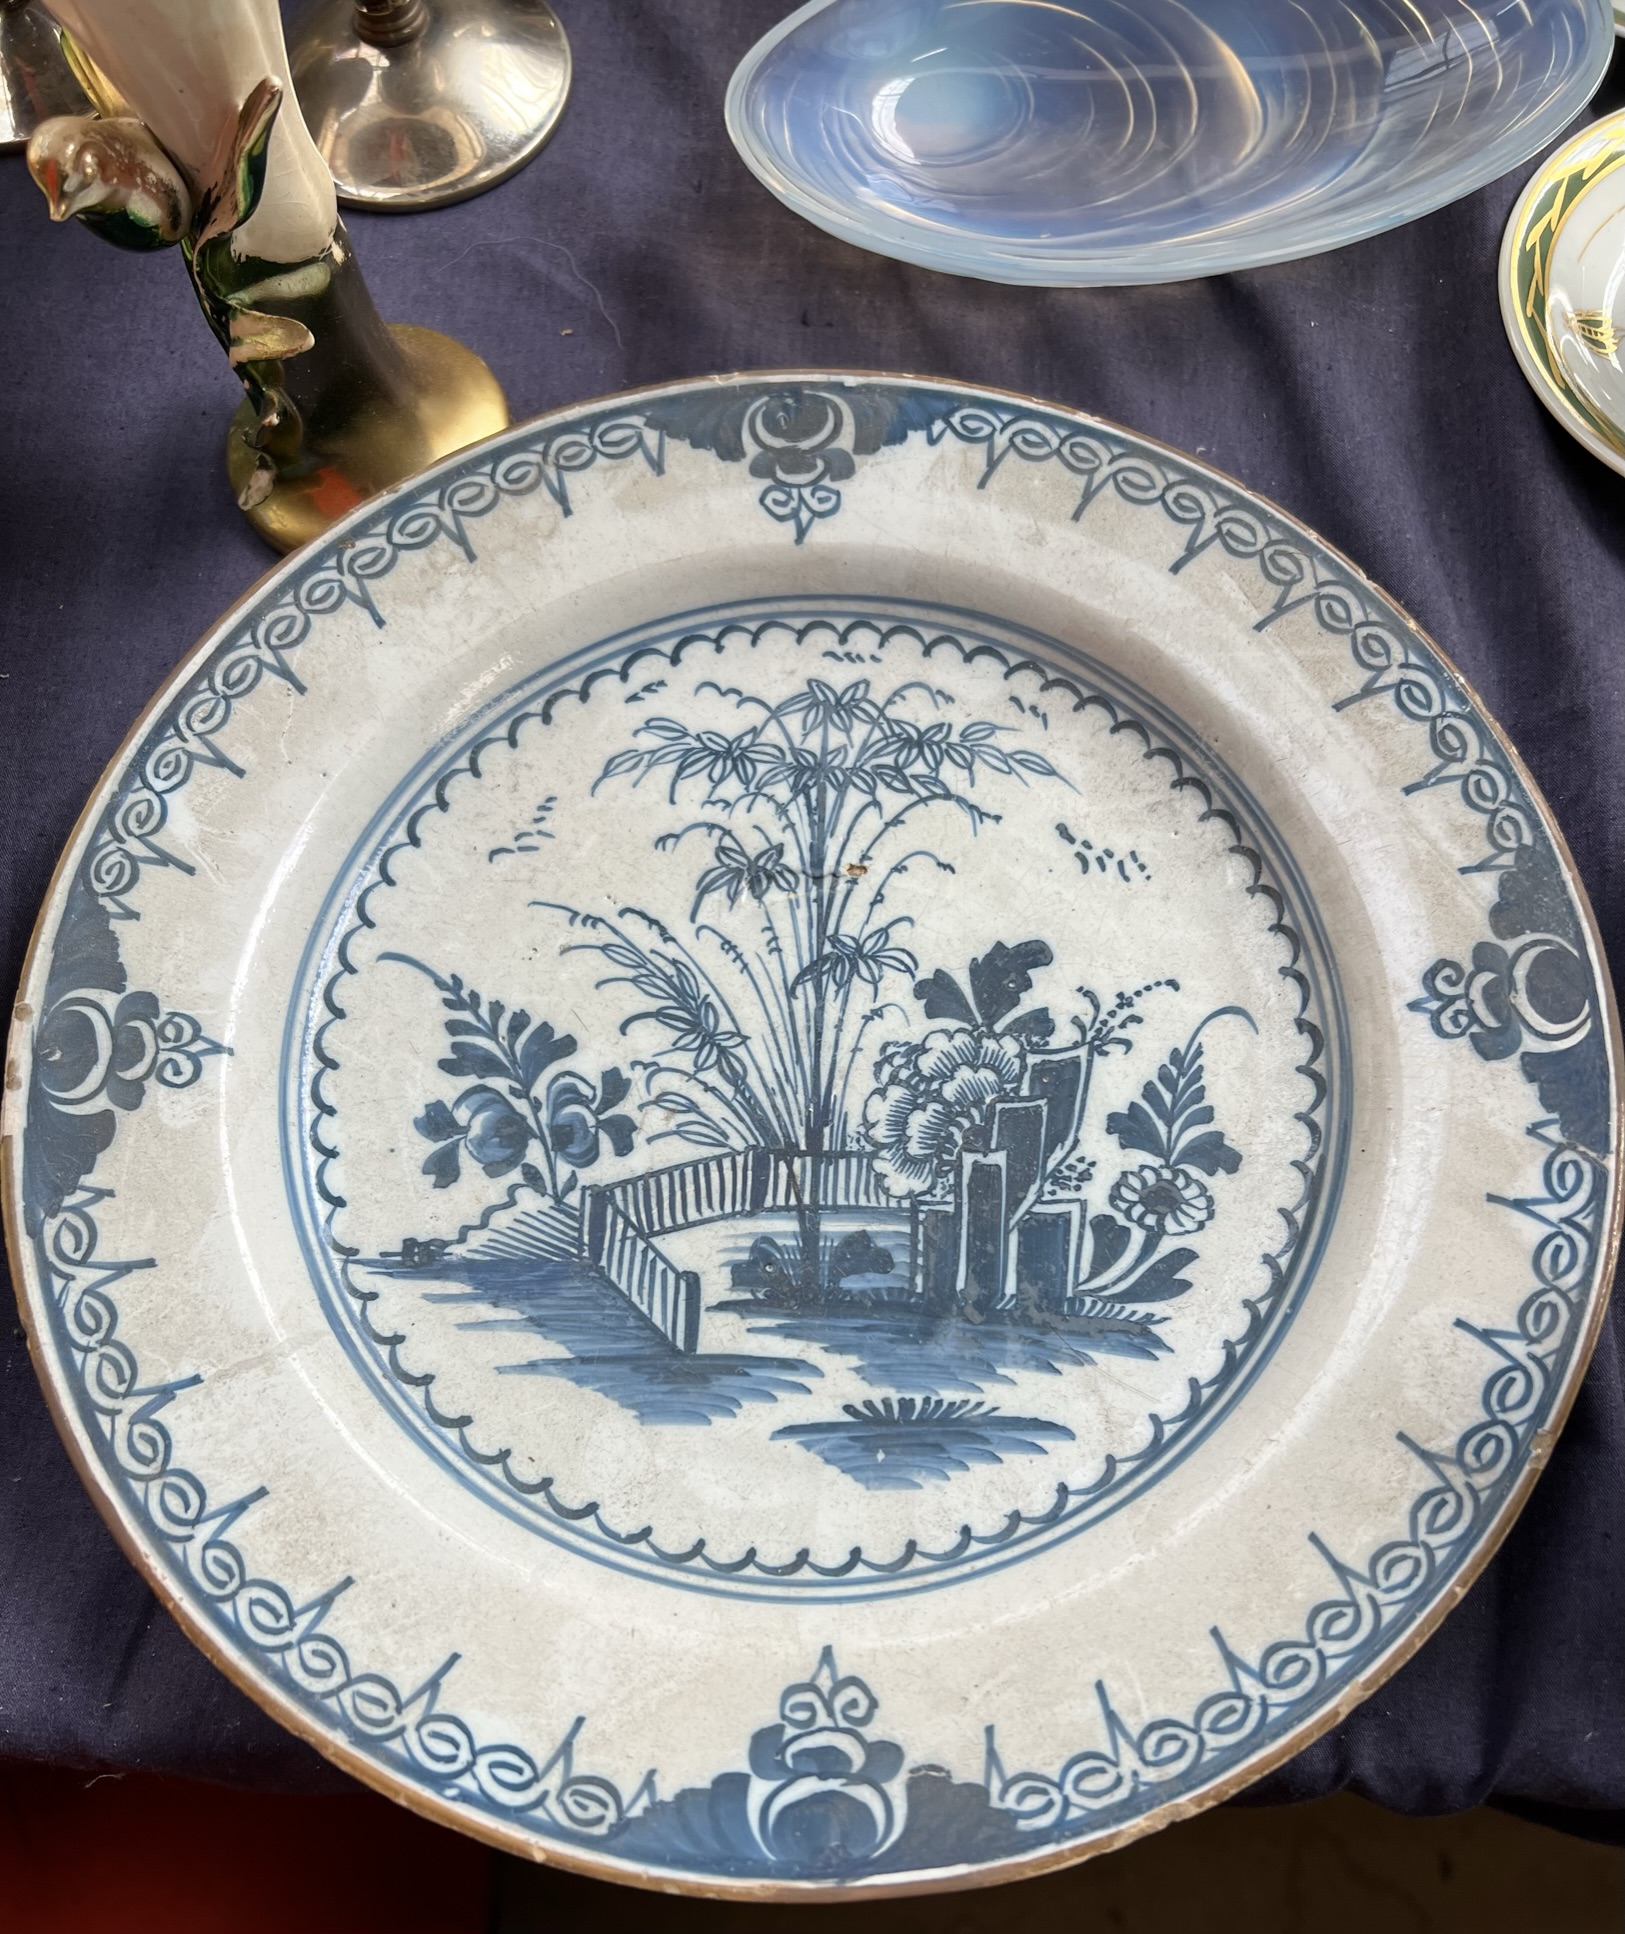 A blue and white delft plate together with Sabino glass, electroplated goblets, - Image 3 of 3